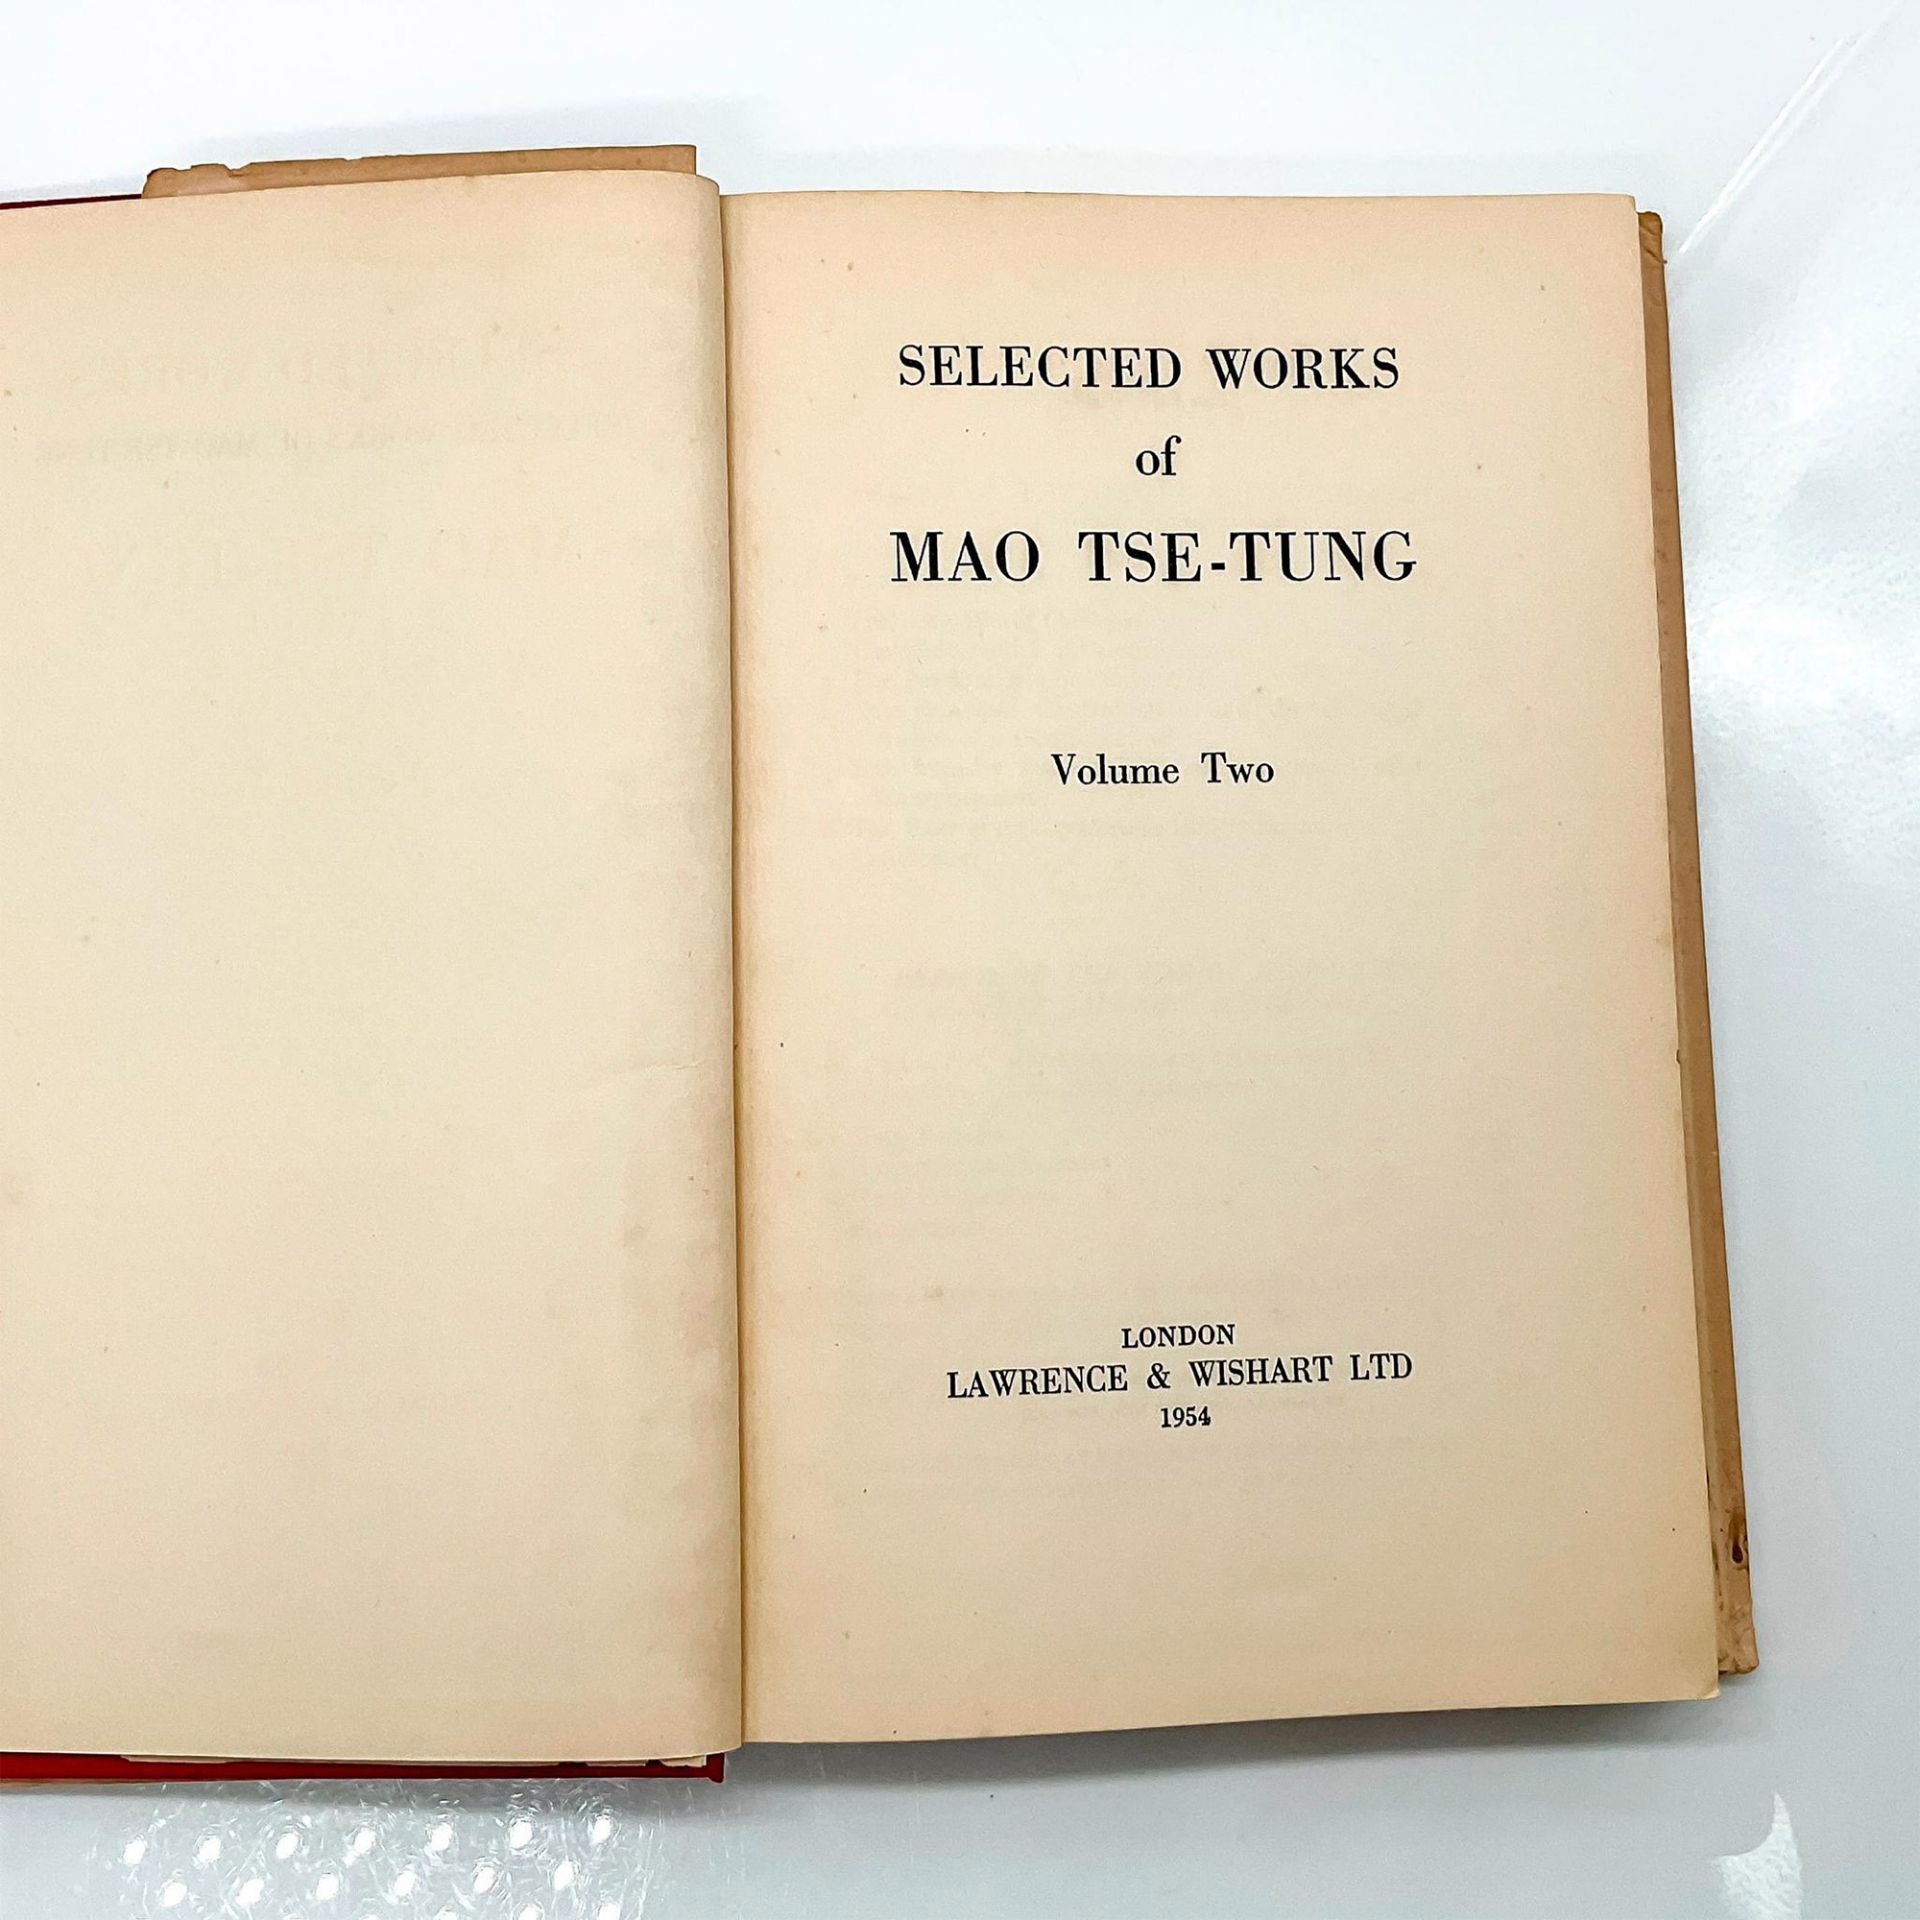 Hardcover Book, Selected Works of Mao Tse-Tung Vol.2 - Image 2 of 2